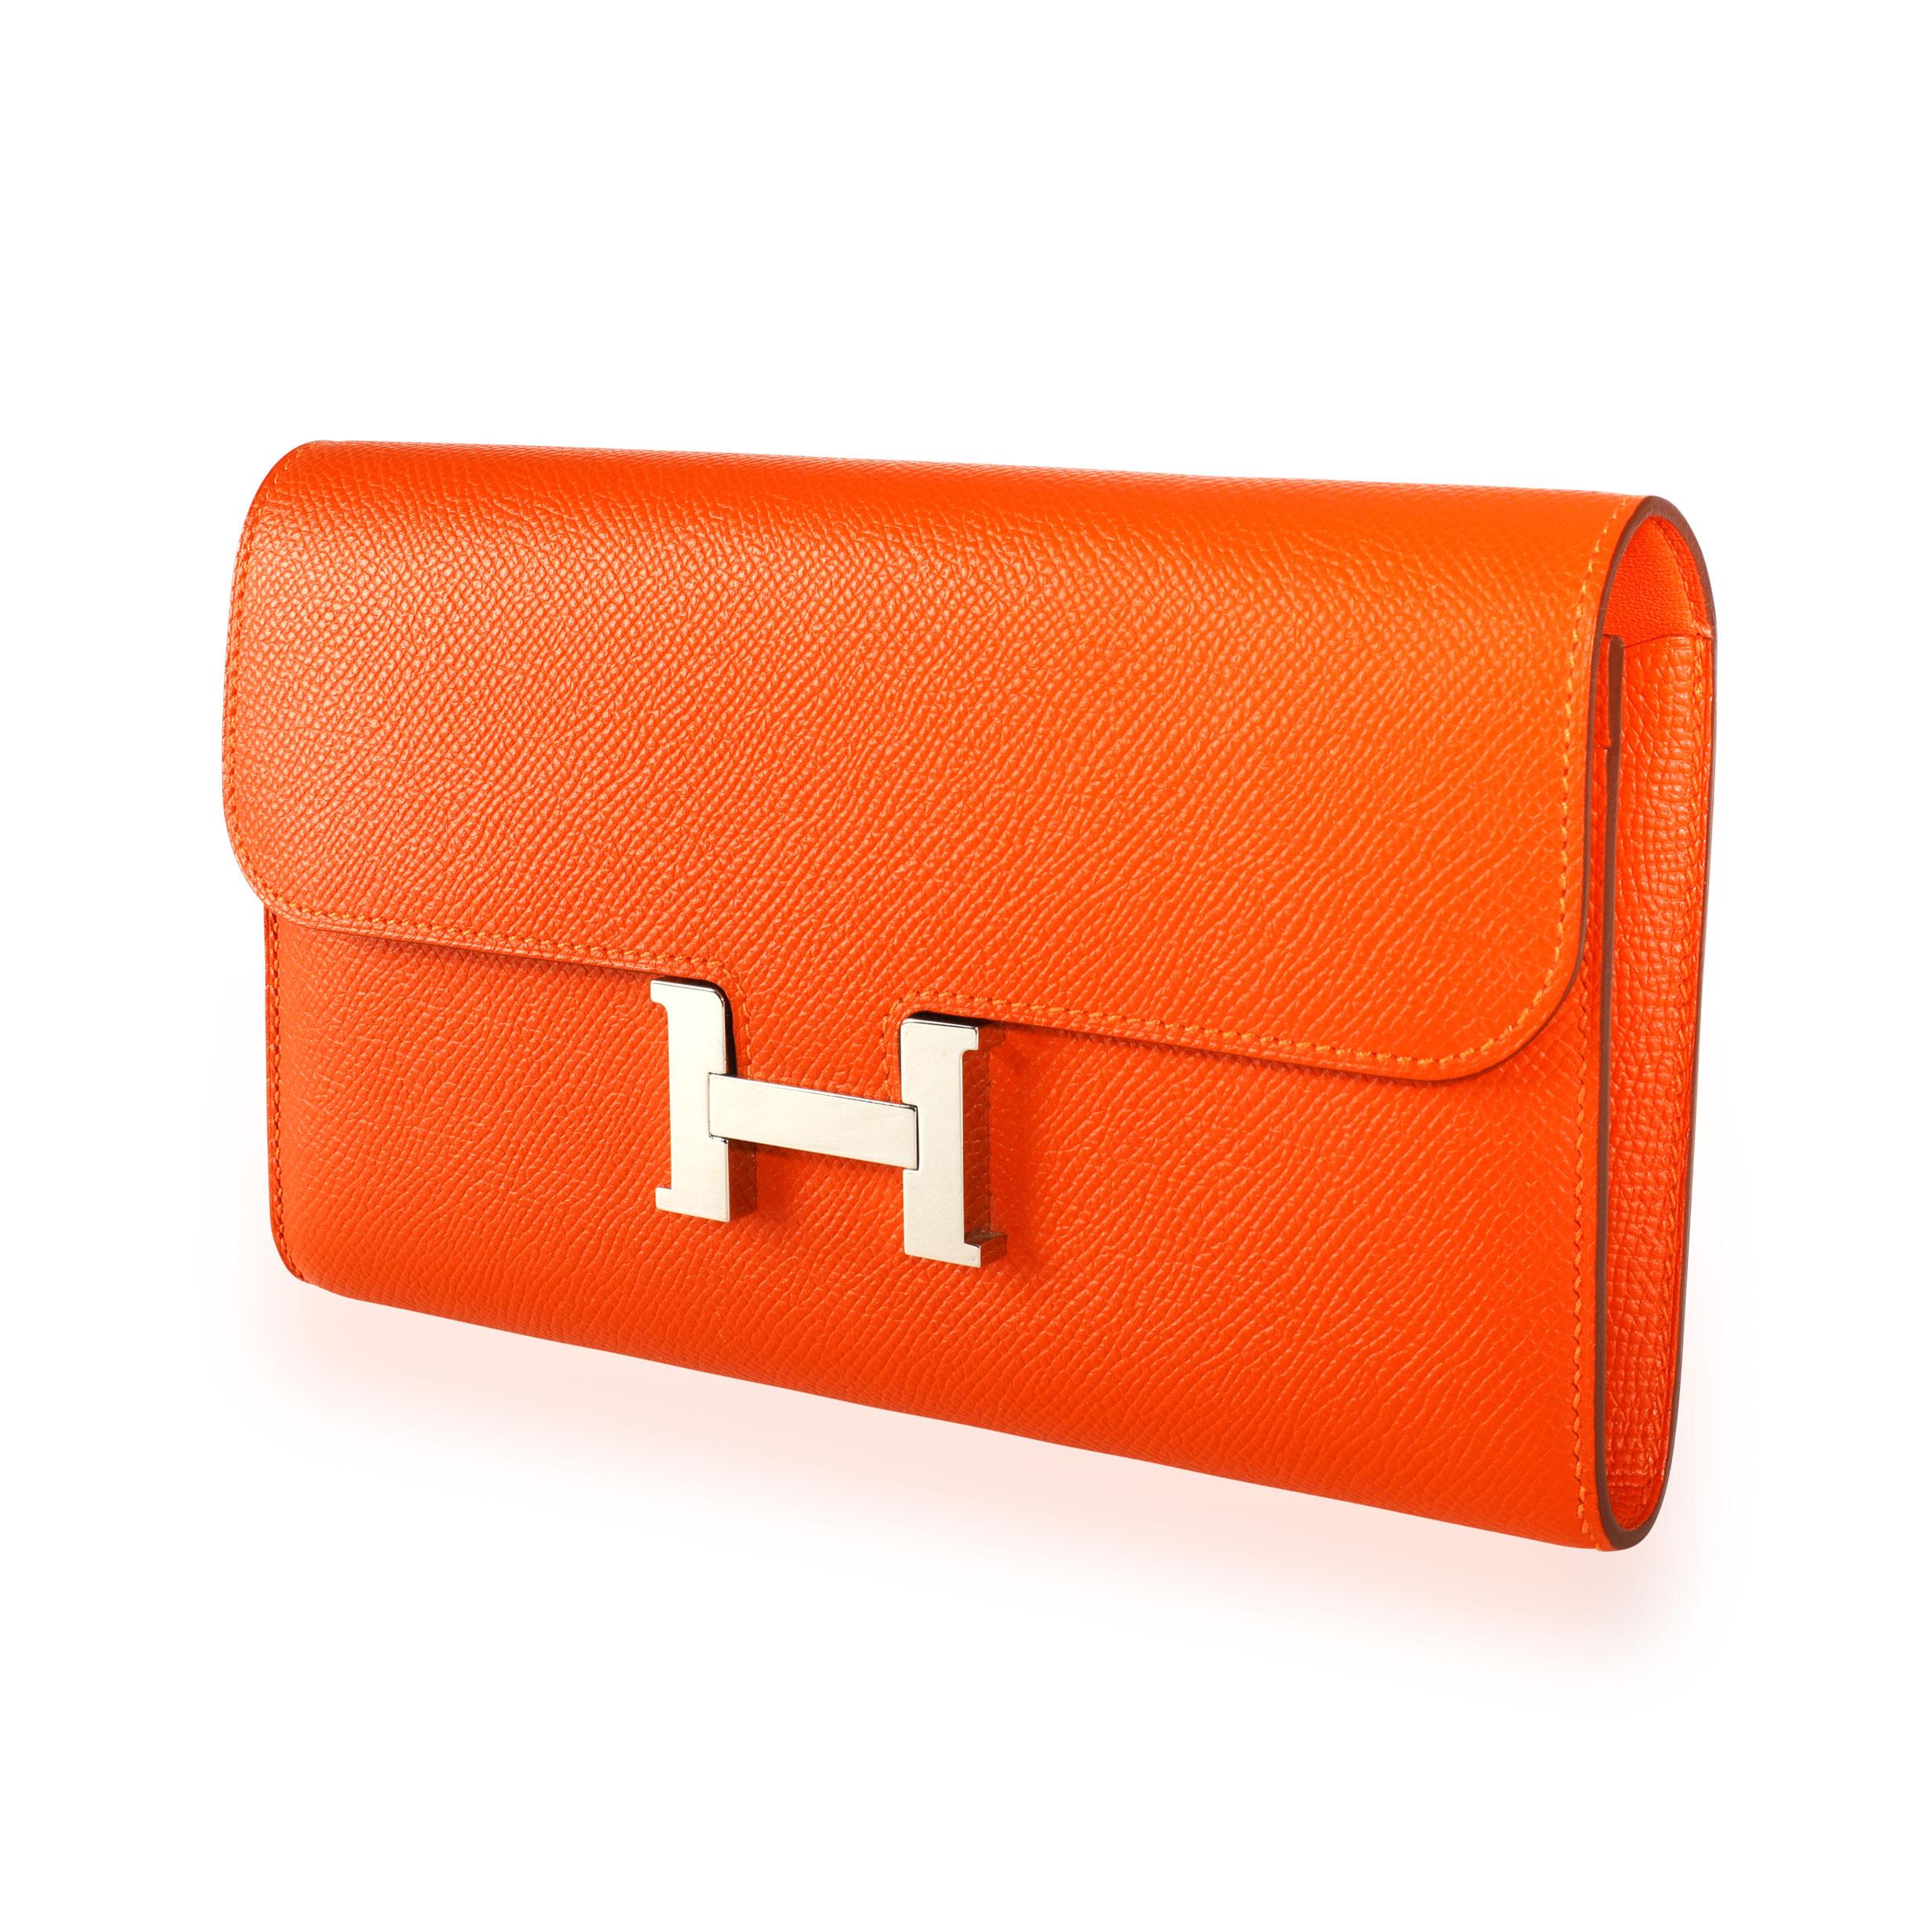  Hermès Orange Epsom Constance Long Wallet PHW
SKU: 110961
MSRP:  
Condition: Pre-owned (3000)
Condition Description: 
Handbag Condition: Very Good
Condition Comments: Very Good Condition. Scratching and tarnishing to hardware. Marks to